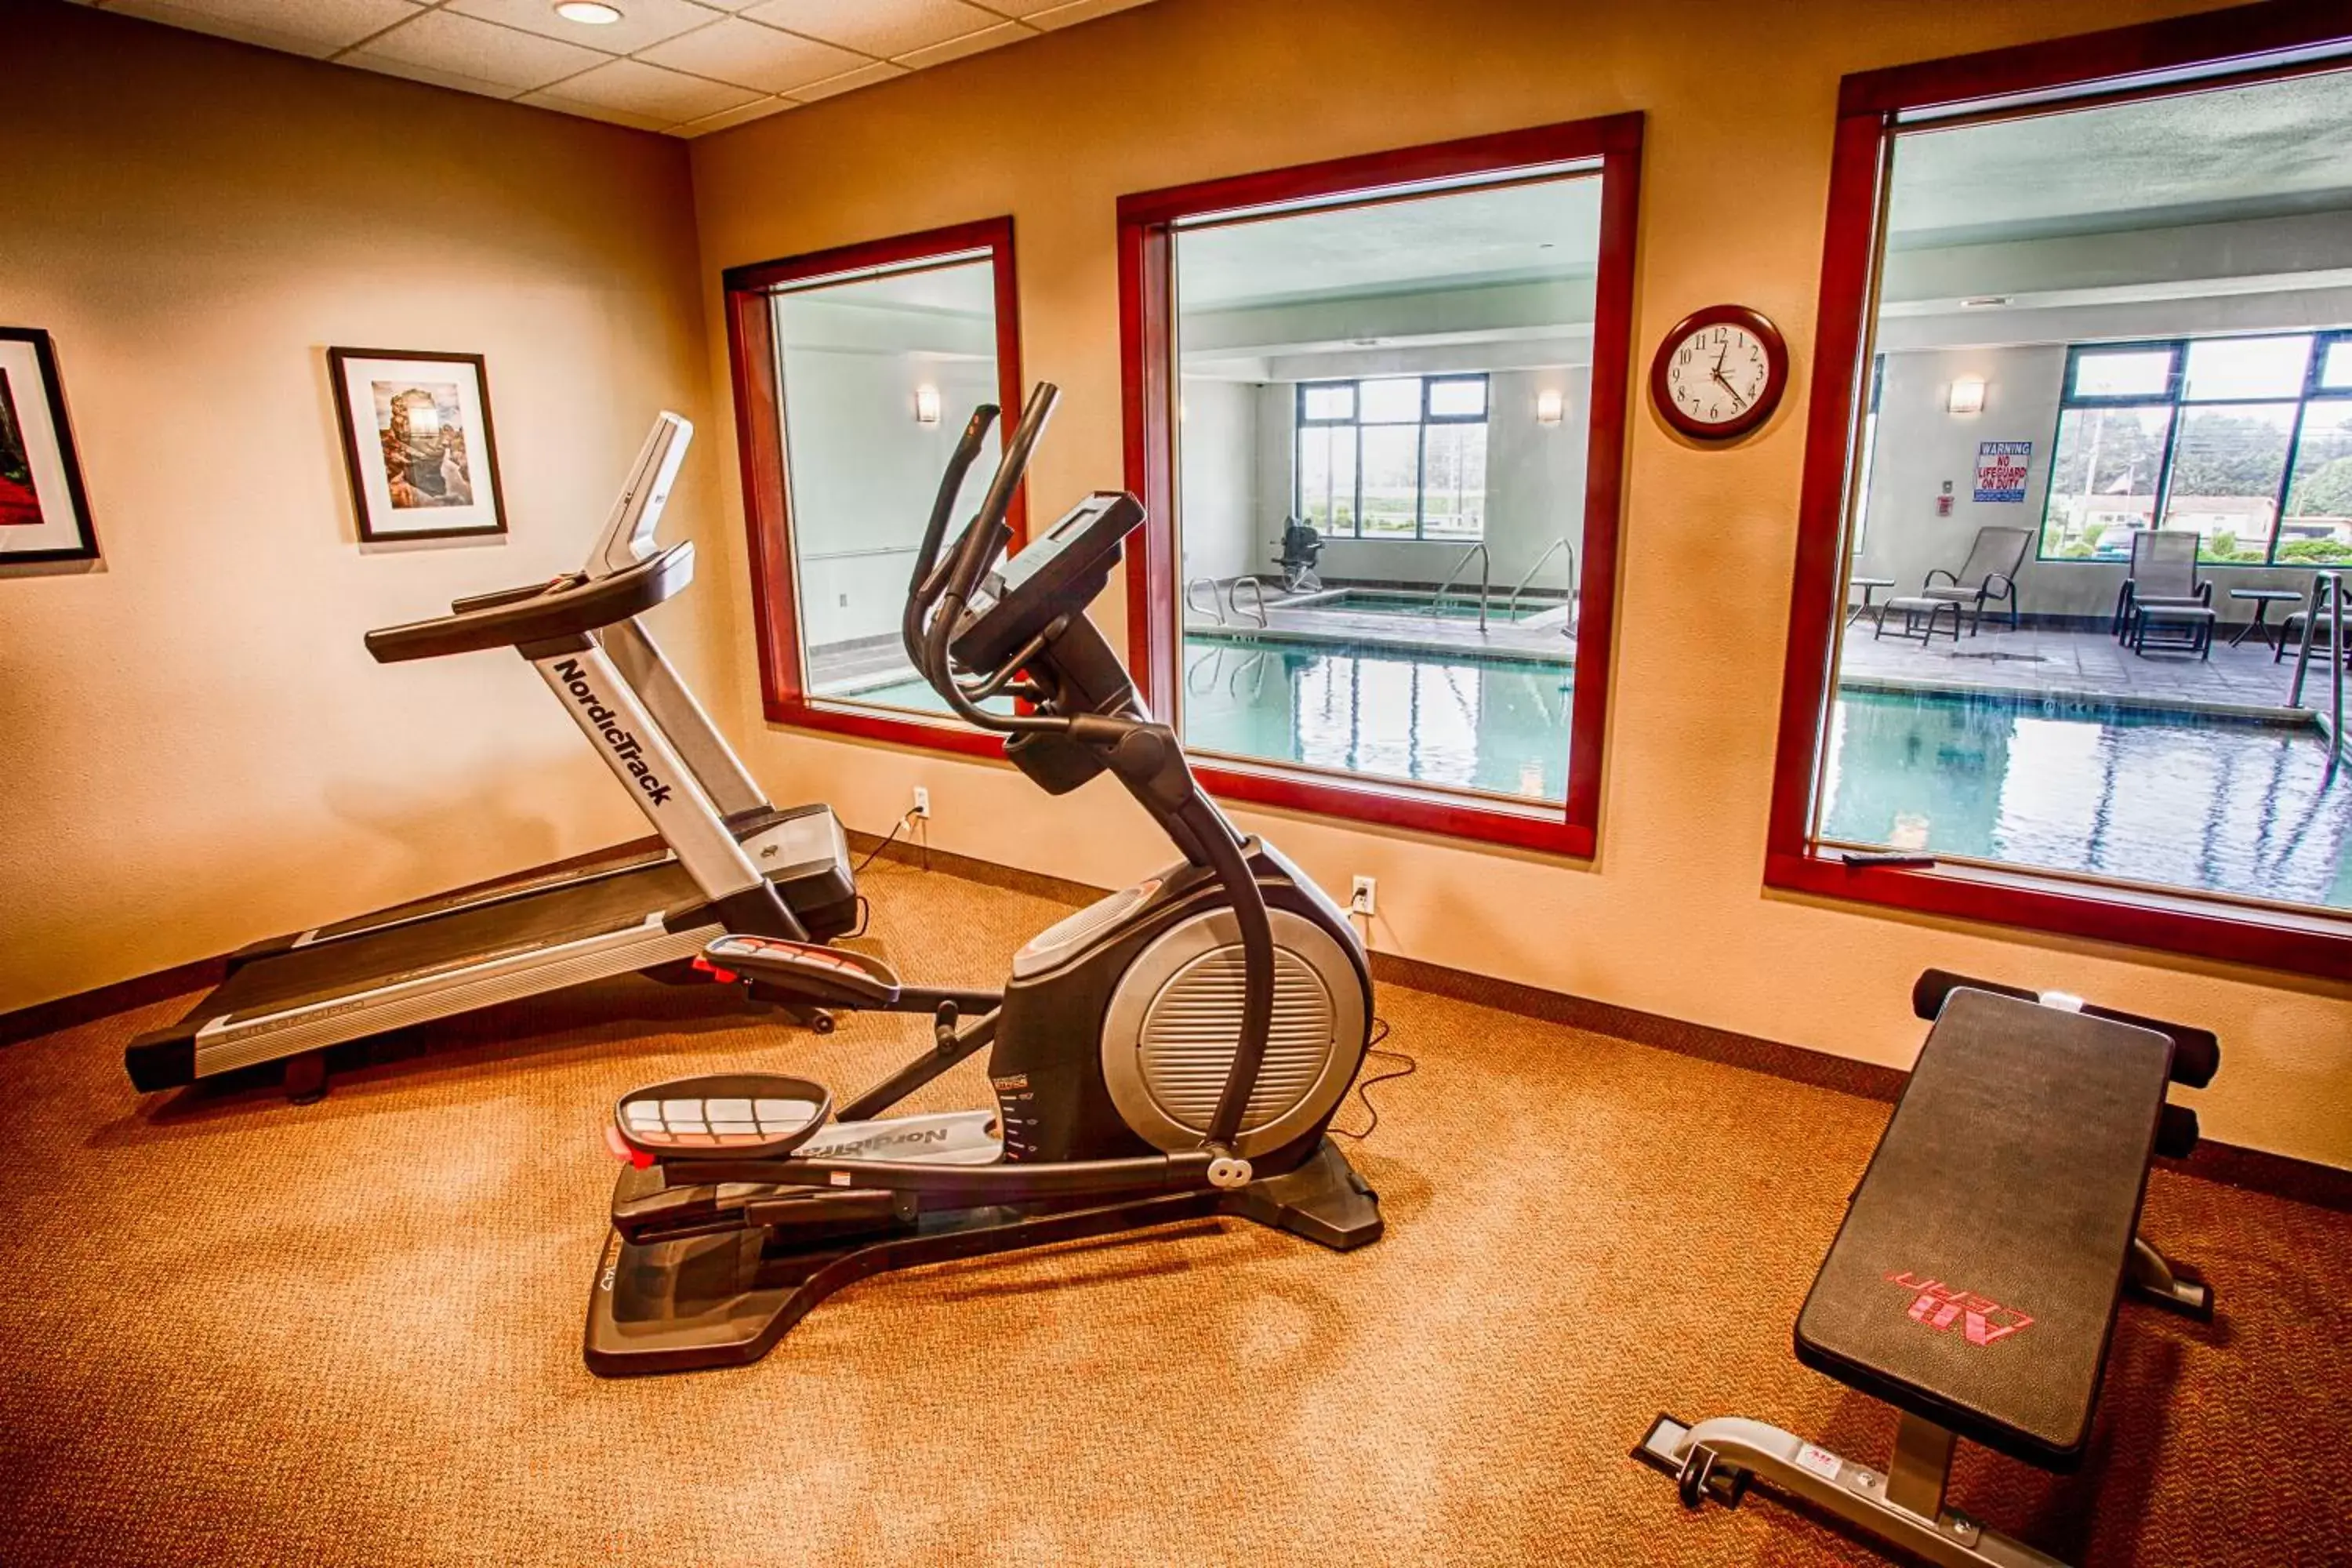 Fitness centre/facilities, Fitness Center/Facilities in Lucky 7 Casino & Hotel (Howonquet Lodge)